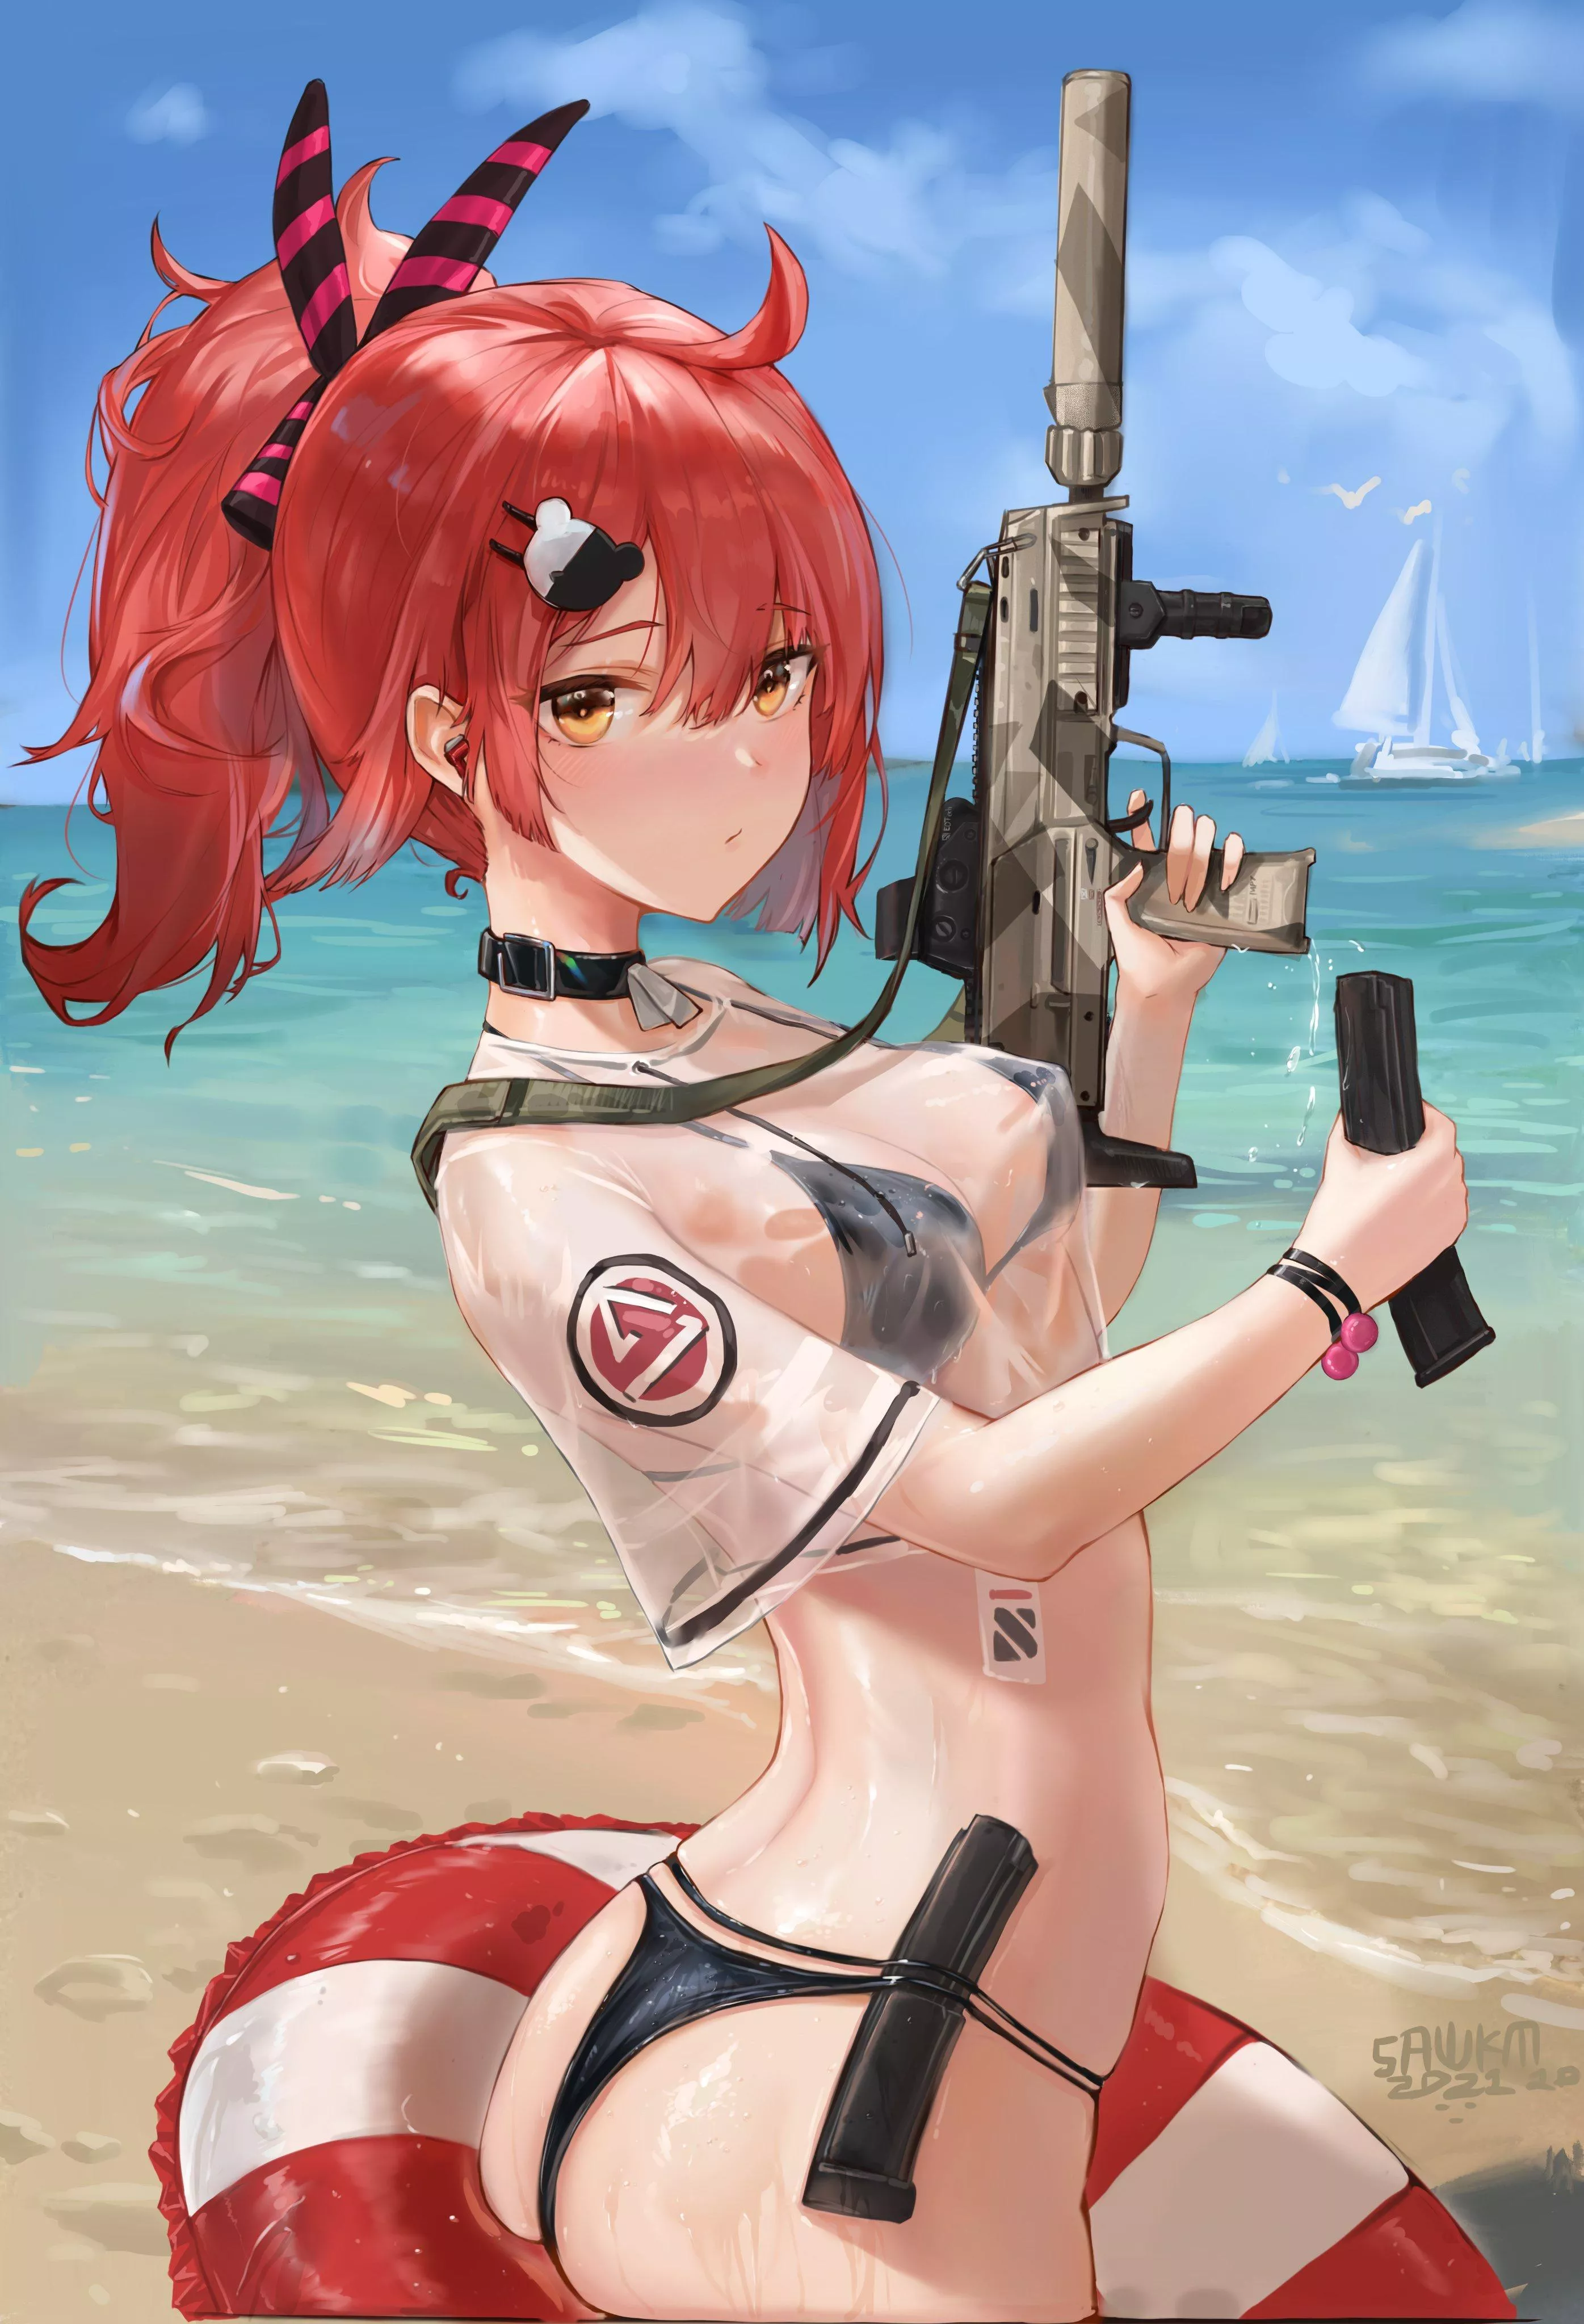 Mp 7 girls frontline nudes in ecchi | Onlynudes.org